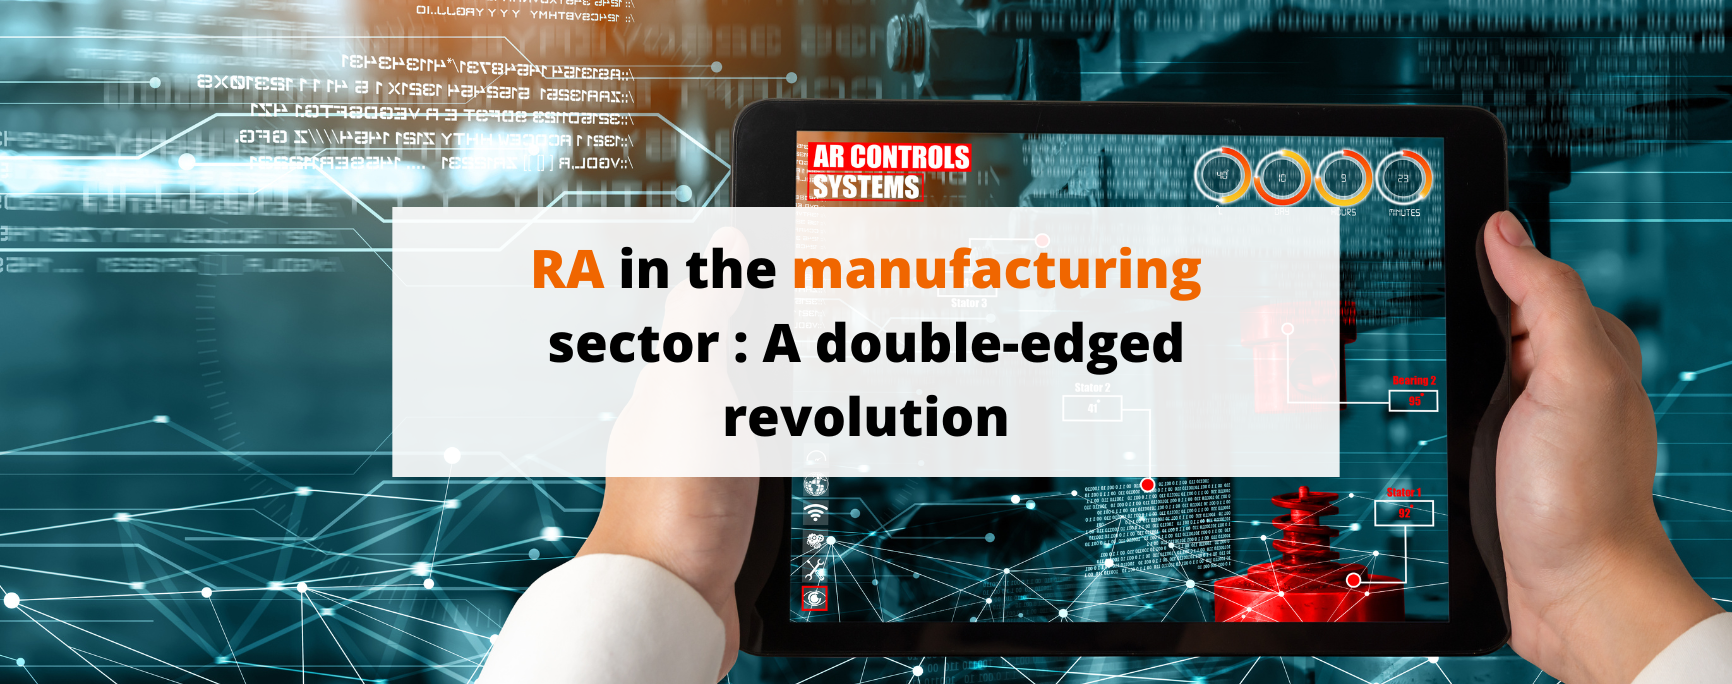 Augmented reality in the manufacturing sector: A double-edged revolution